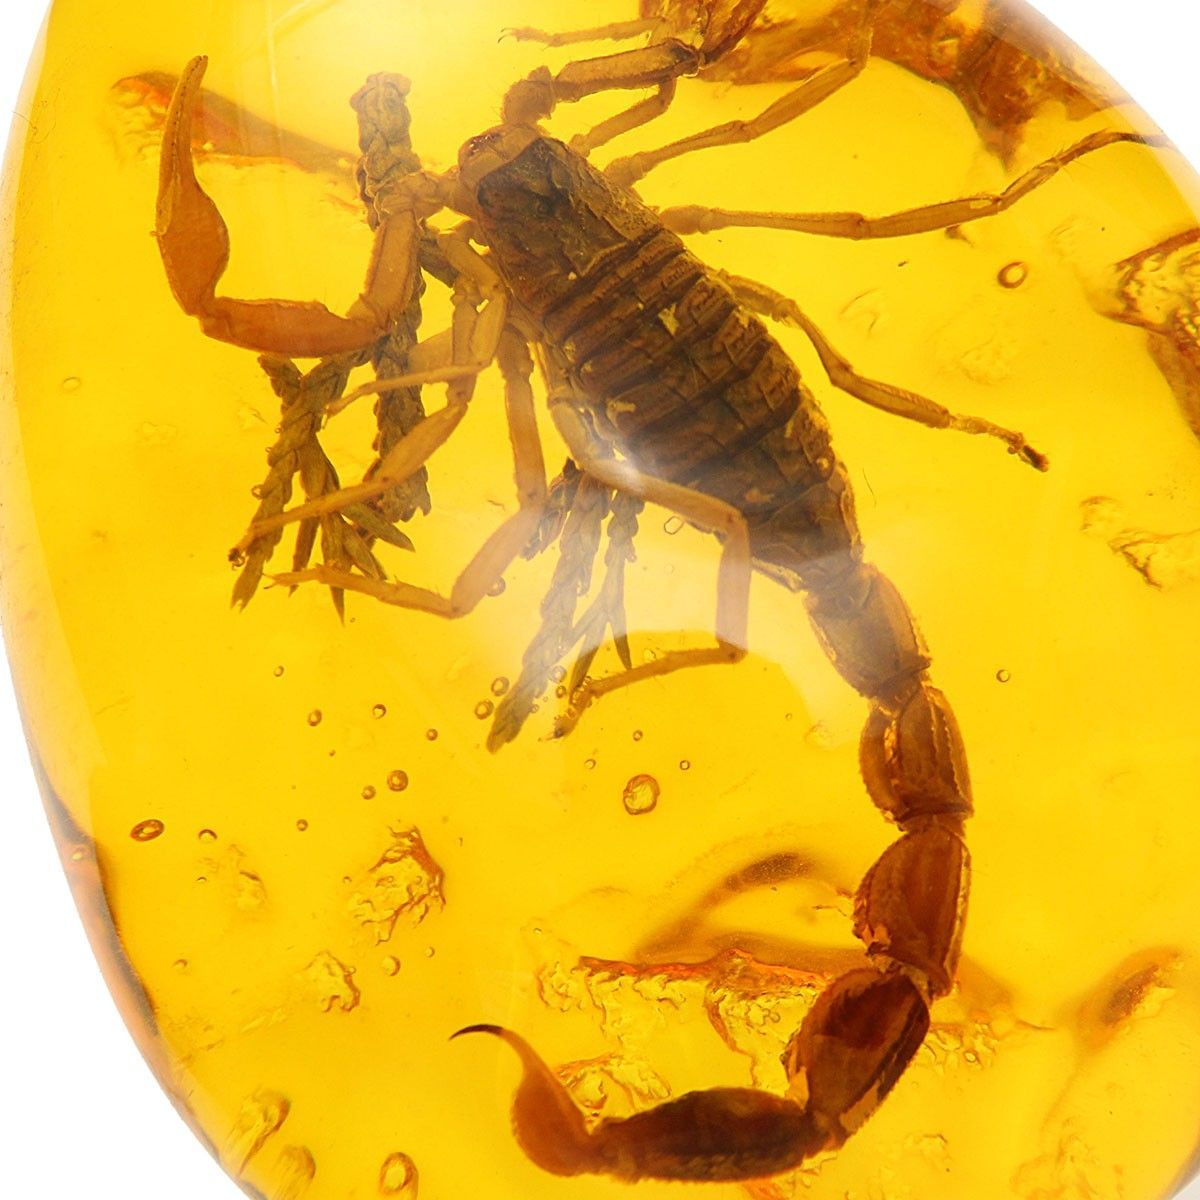 Insect-Stone-Scorpions-Inclusion-Amber-Baltic-Pendant-Necklace-Decorations-1476904